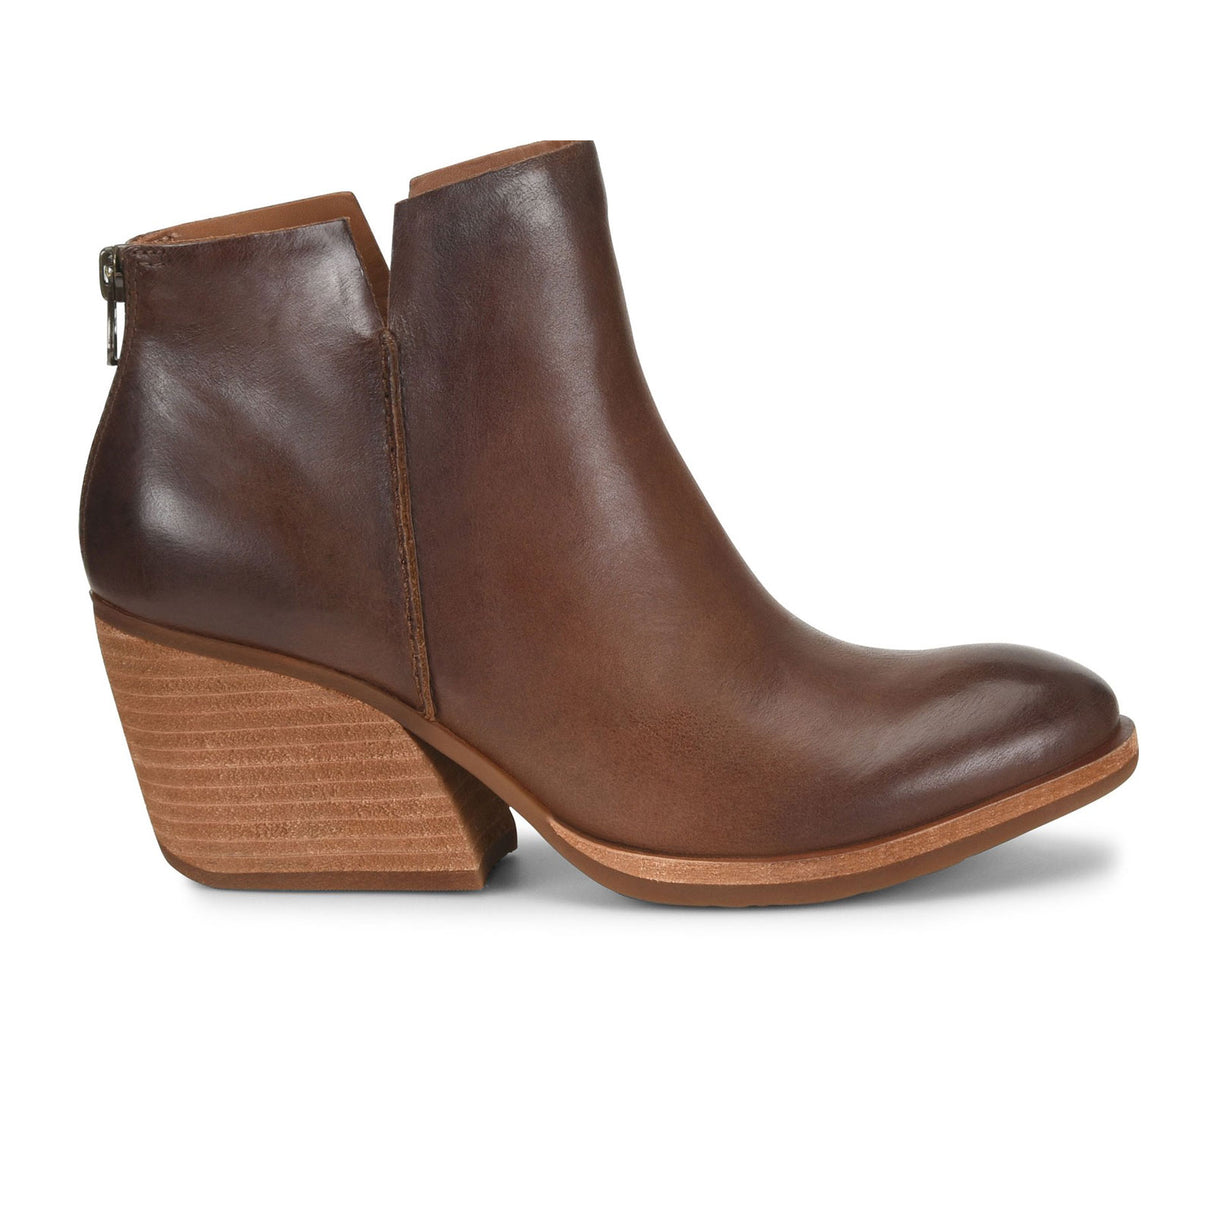 Kork-Ease Chandra Heeled Ankle Boot (Women) - Brown Boots - Fashion - The Heel Shoe Fitters